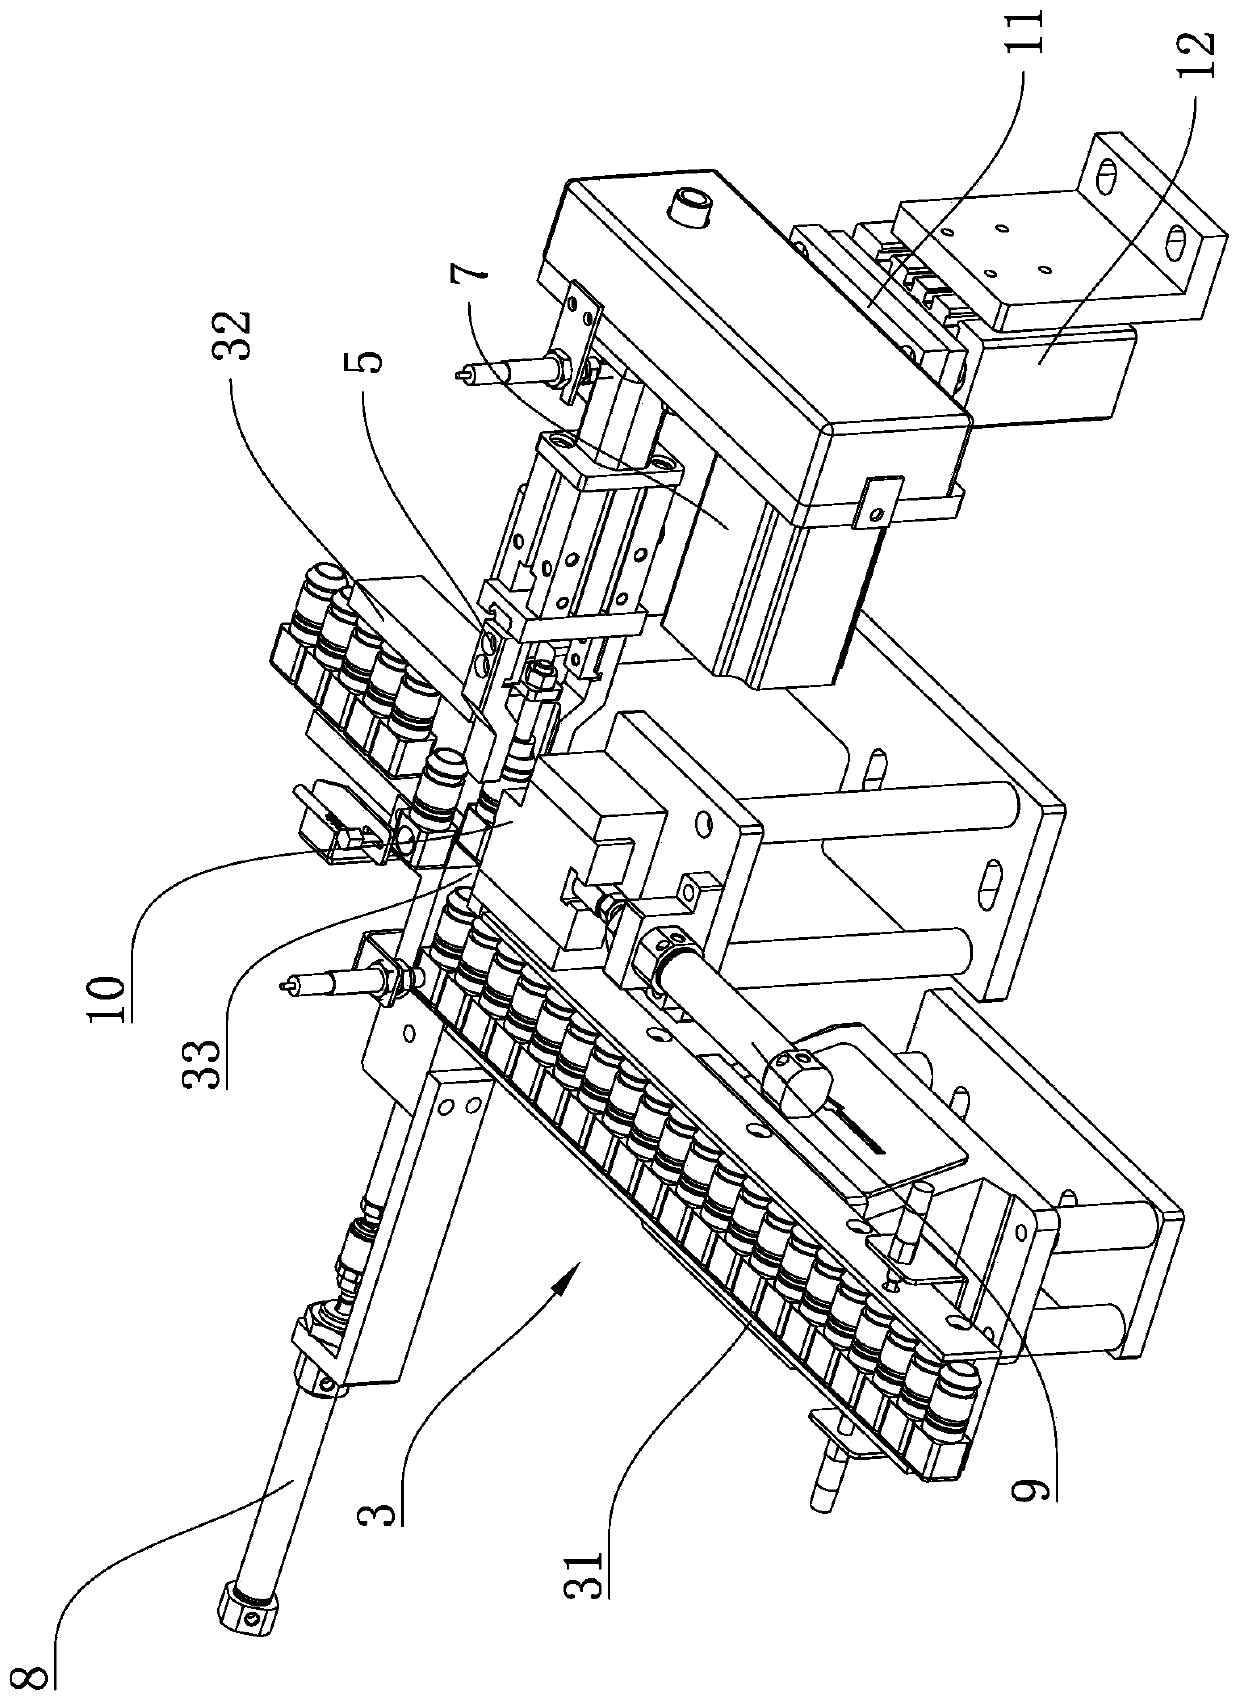 Assembling machine for right-angle male connectors